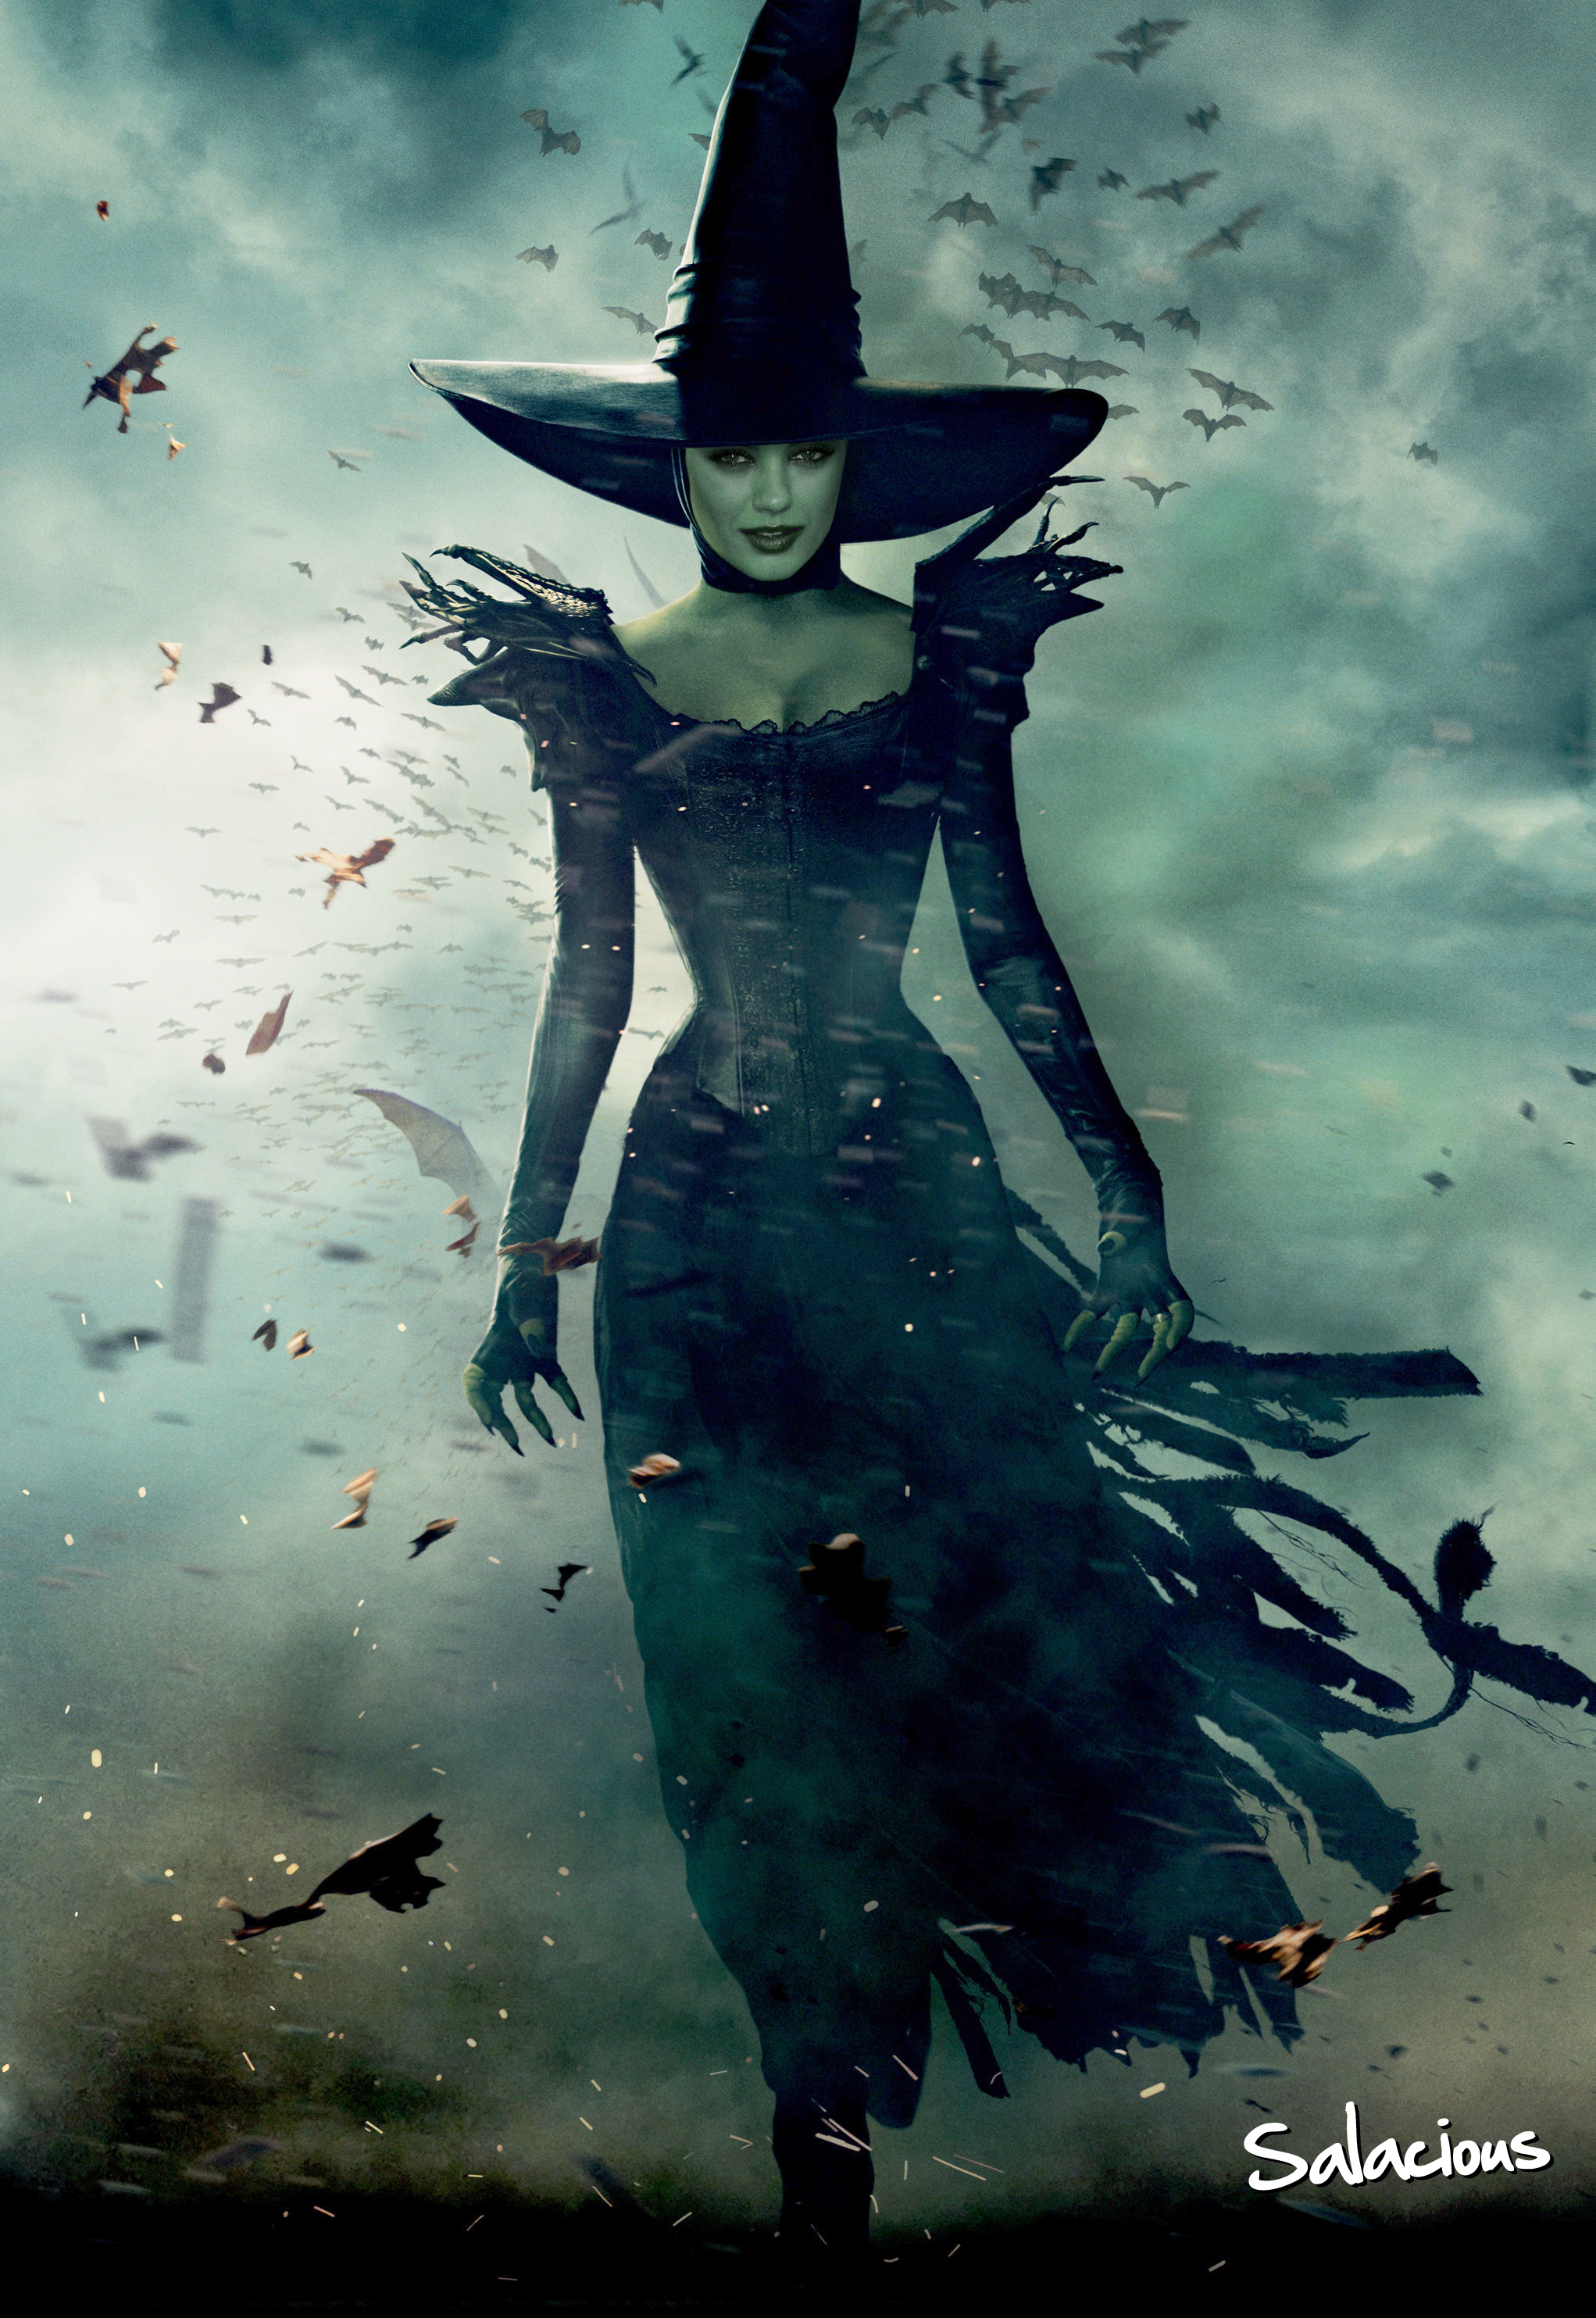 Wicked Witch Wallpaper - Mila Kunis Wicked Witch - HD Wallpaper 